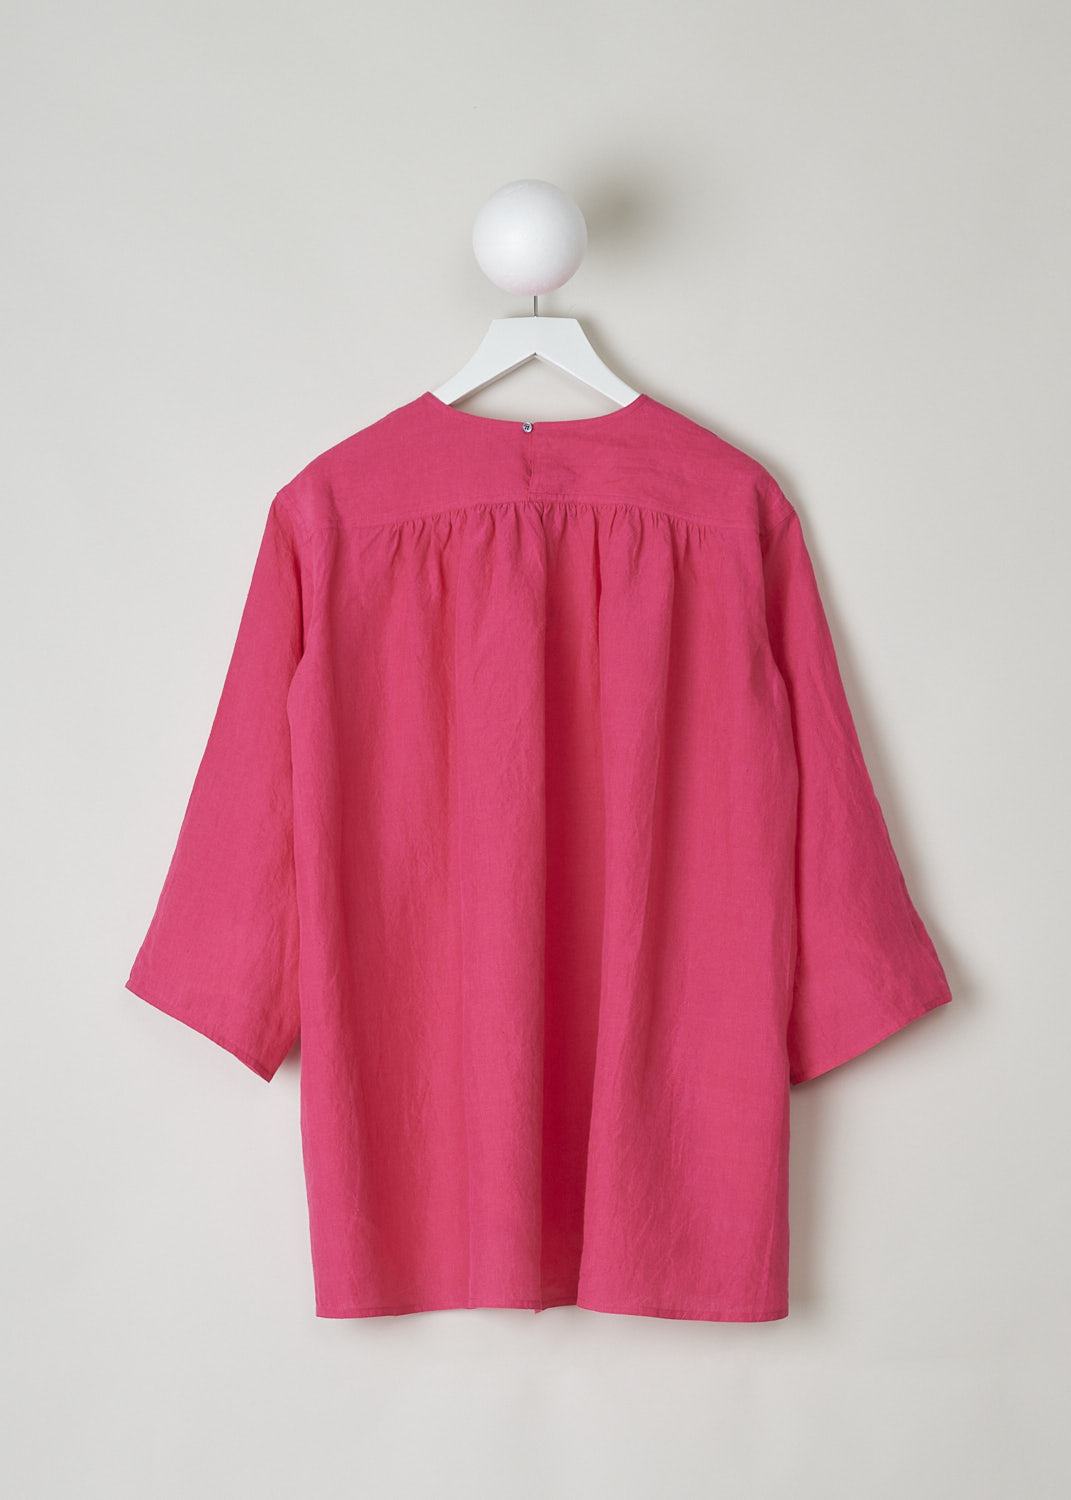 SOFIE Dâ€™HOORE, FUCHSIA COLORED BINETTE TOP, BINETTE_LIFE_FUCHSIA, Pink, Back, This oversized fuchsia top features a round neckline, dropped shoulders and long sleeves. The A-line top has a square bib-like front with pleated details below. Concealed in the side seams, slanted pockets can be found. The top has an asymmetrical finish, meaning the back is a little longer than the front. 

